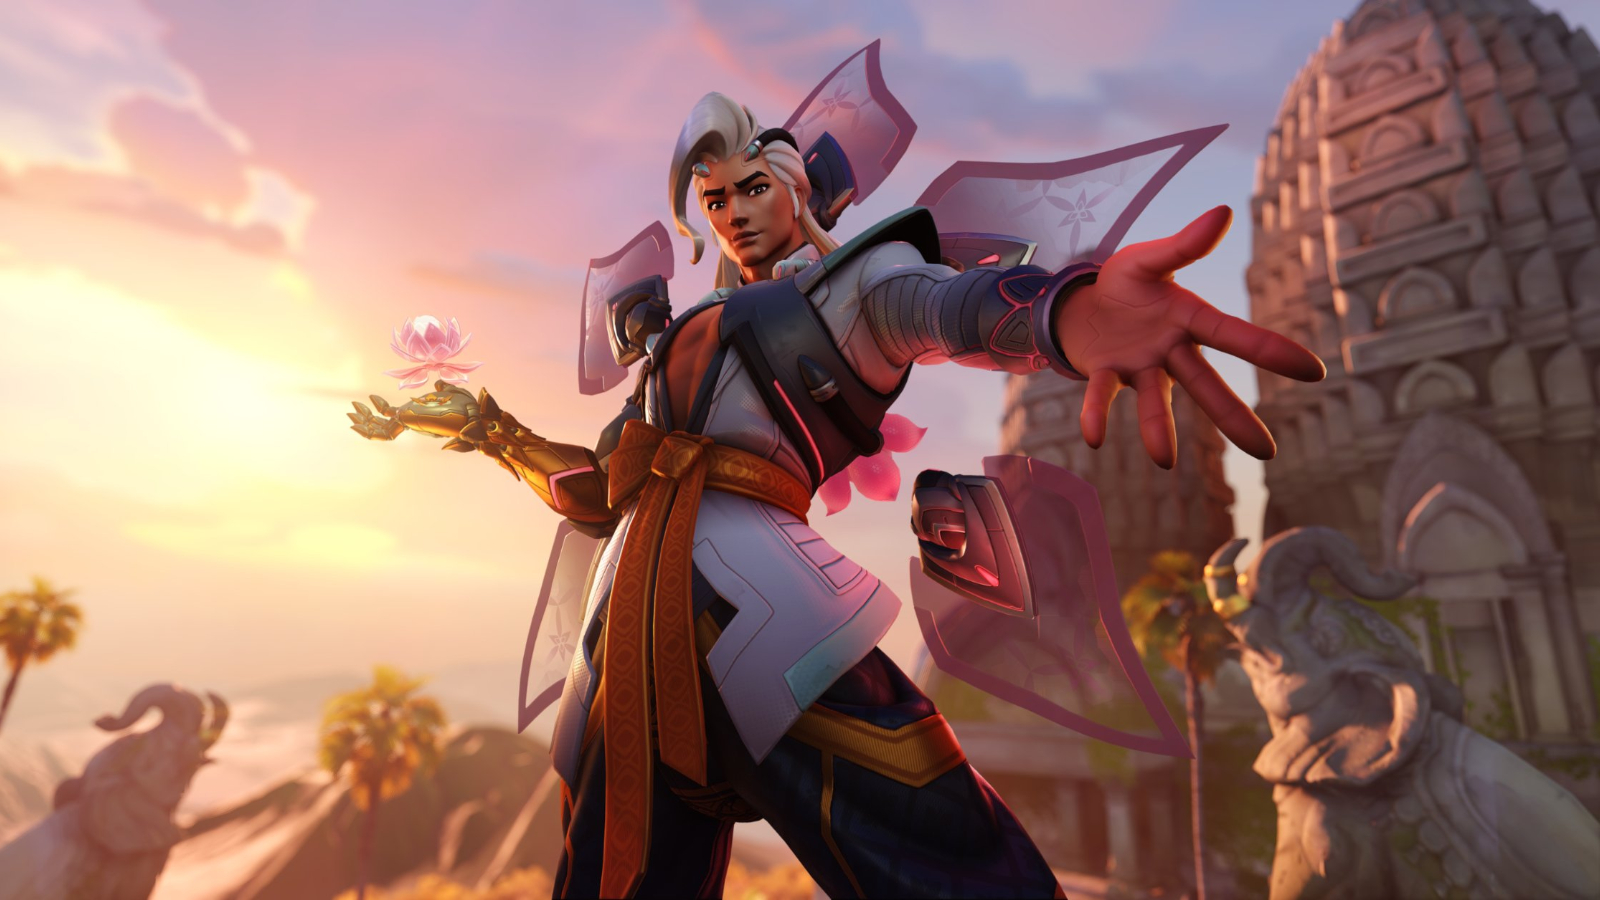 Overwatch 2 players are already worried about “clunky” Lifeweaver controls – Dexerto